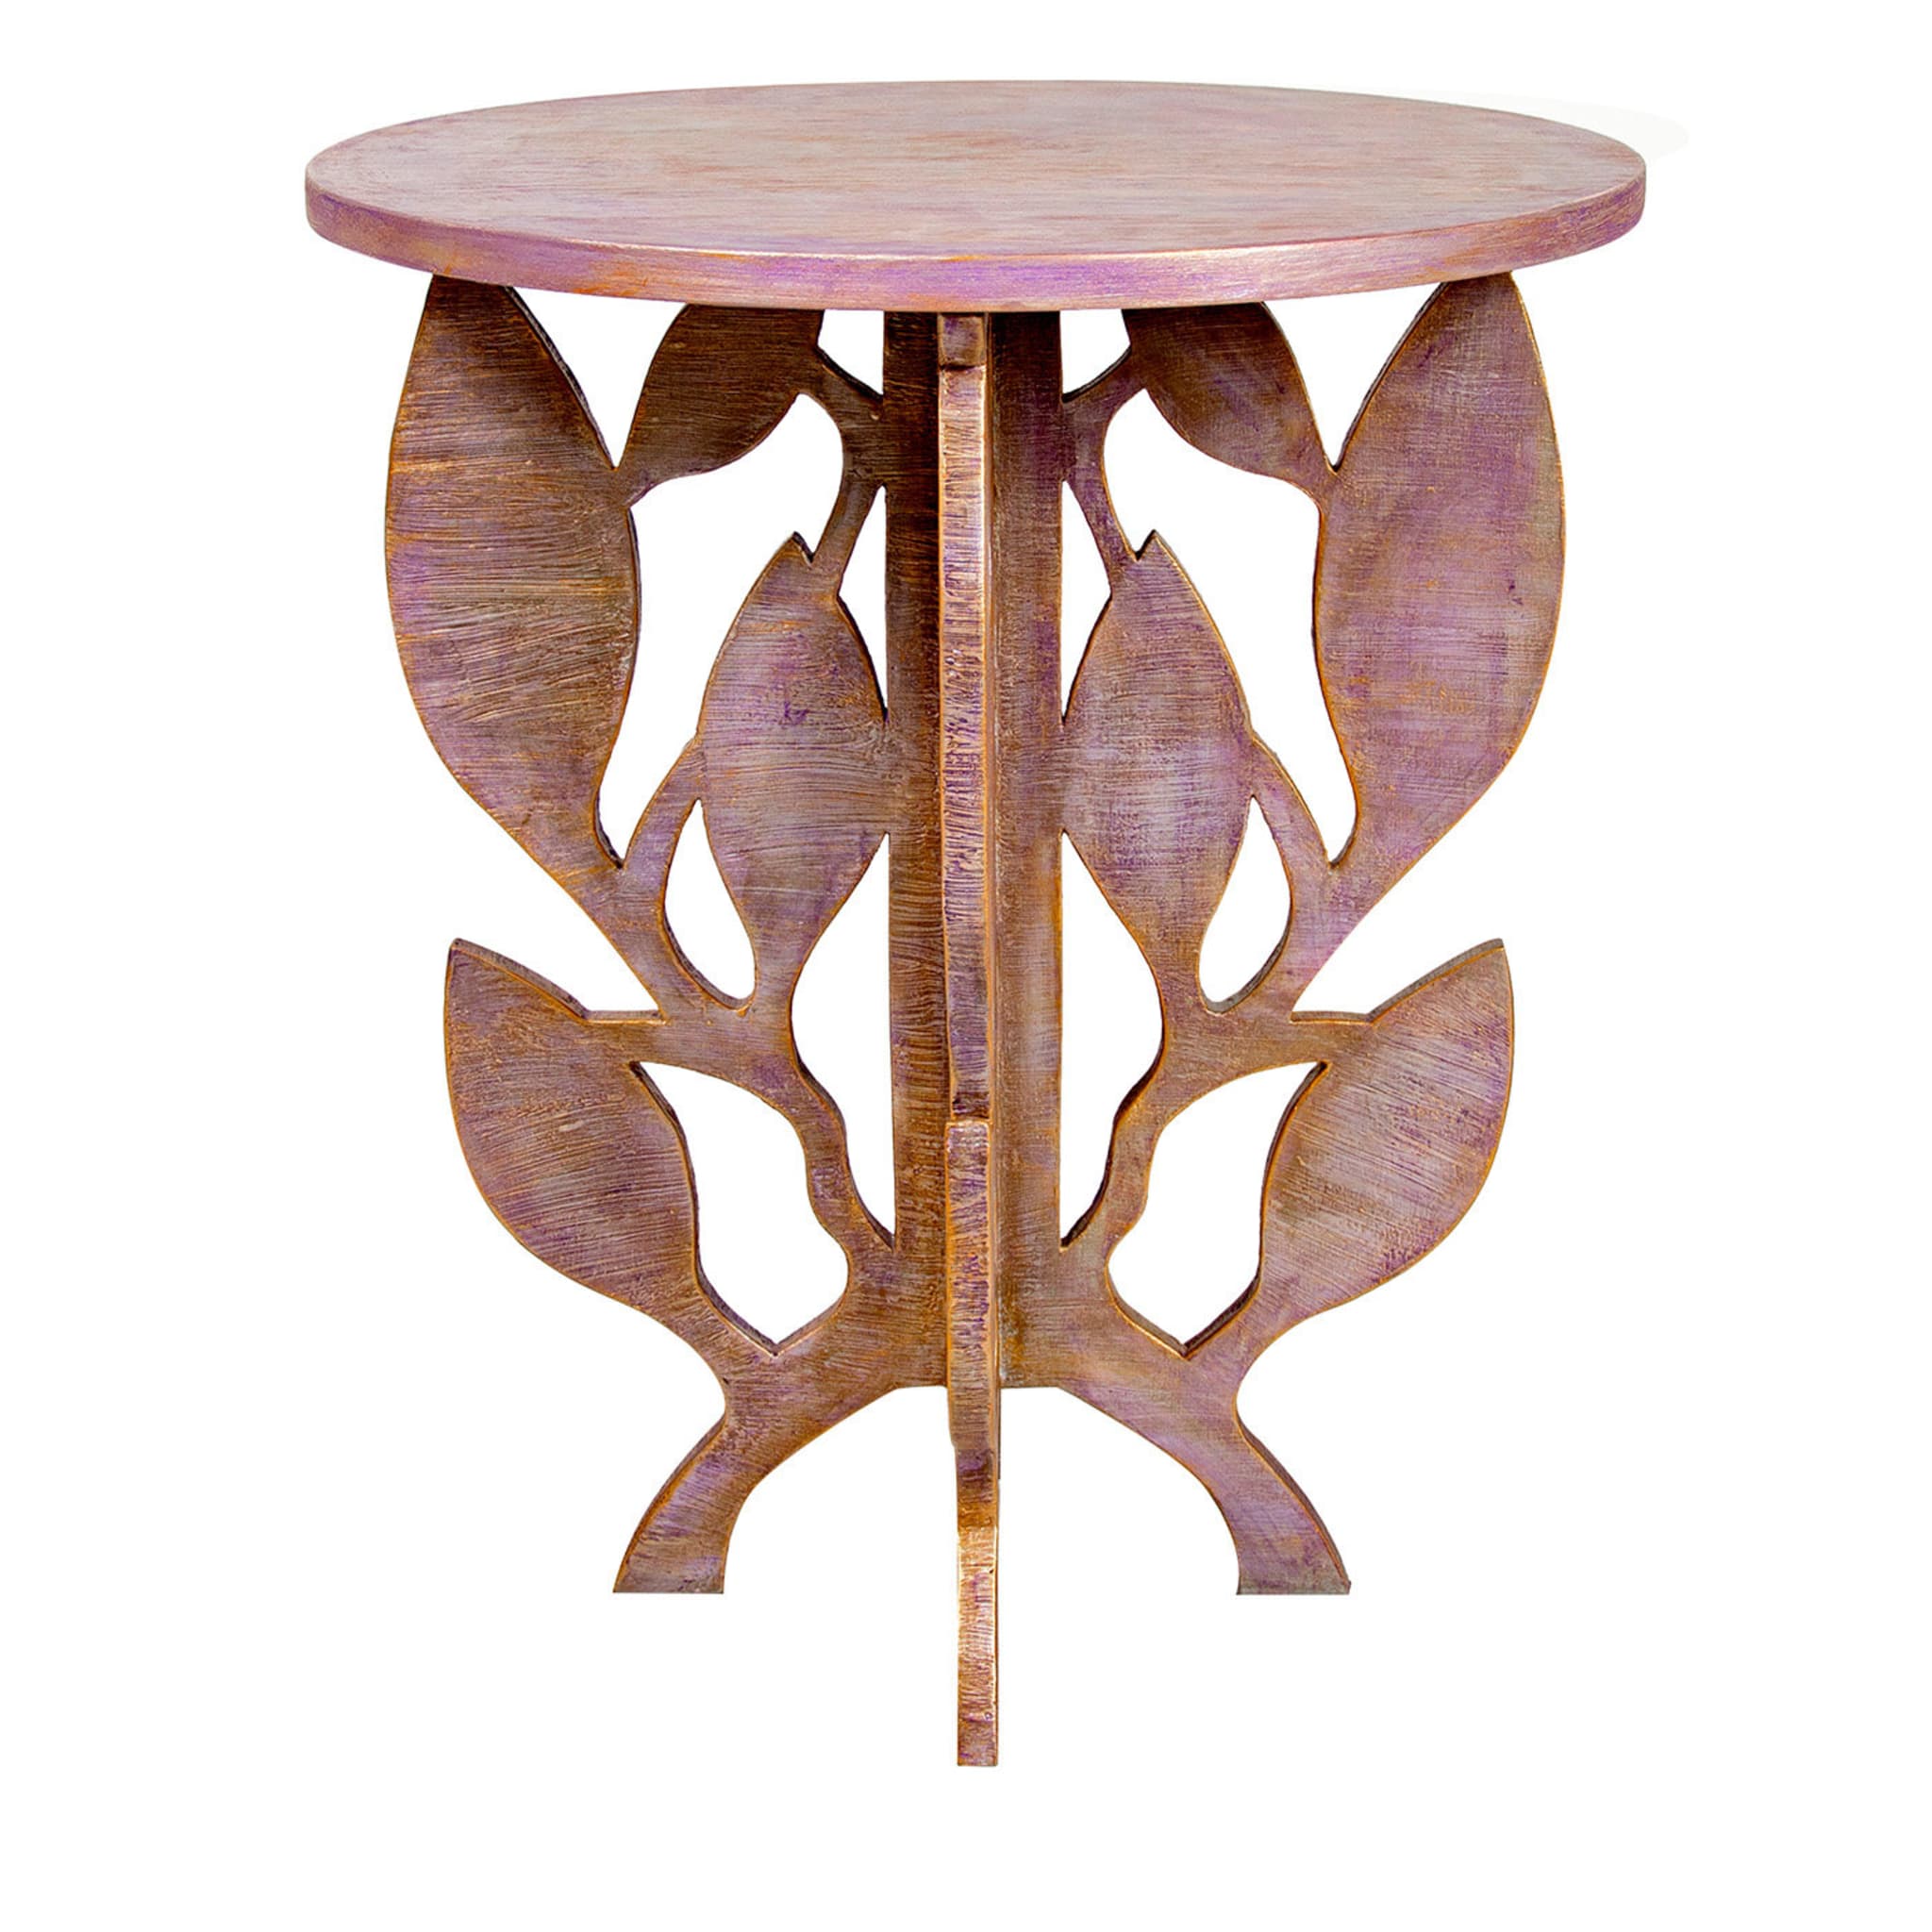 Ramy Wood Side Table by Giannella Ventura - Main view